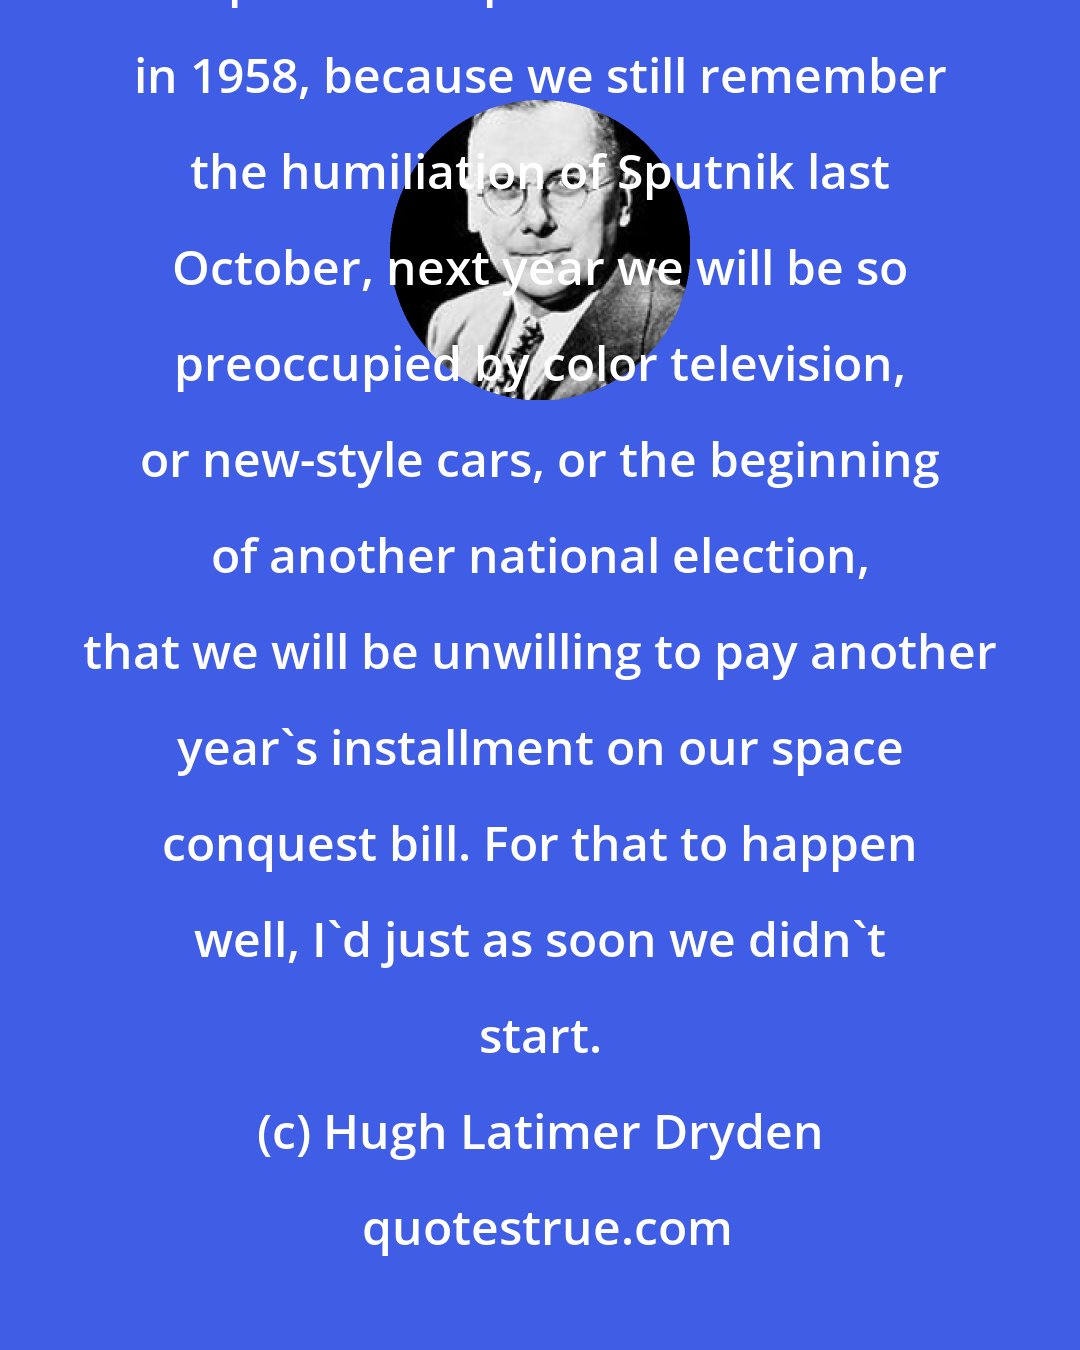 Hugh Latimer Dryden: I know that some knowledgeable people fear that although we might be willing to spend a couple of billion dollars in 1958, because we still remember the humiliation of Sputnik last October, next year we will be so preoccupied by color television, or new-style cars, or the beginning of another national election, that we will be unwilling to pay another year's installment on our space conquest bill. For that to happen well, I'd just as soon we didn't start.